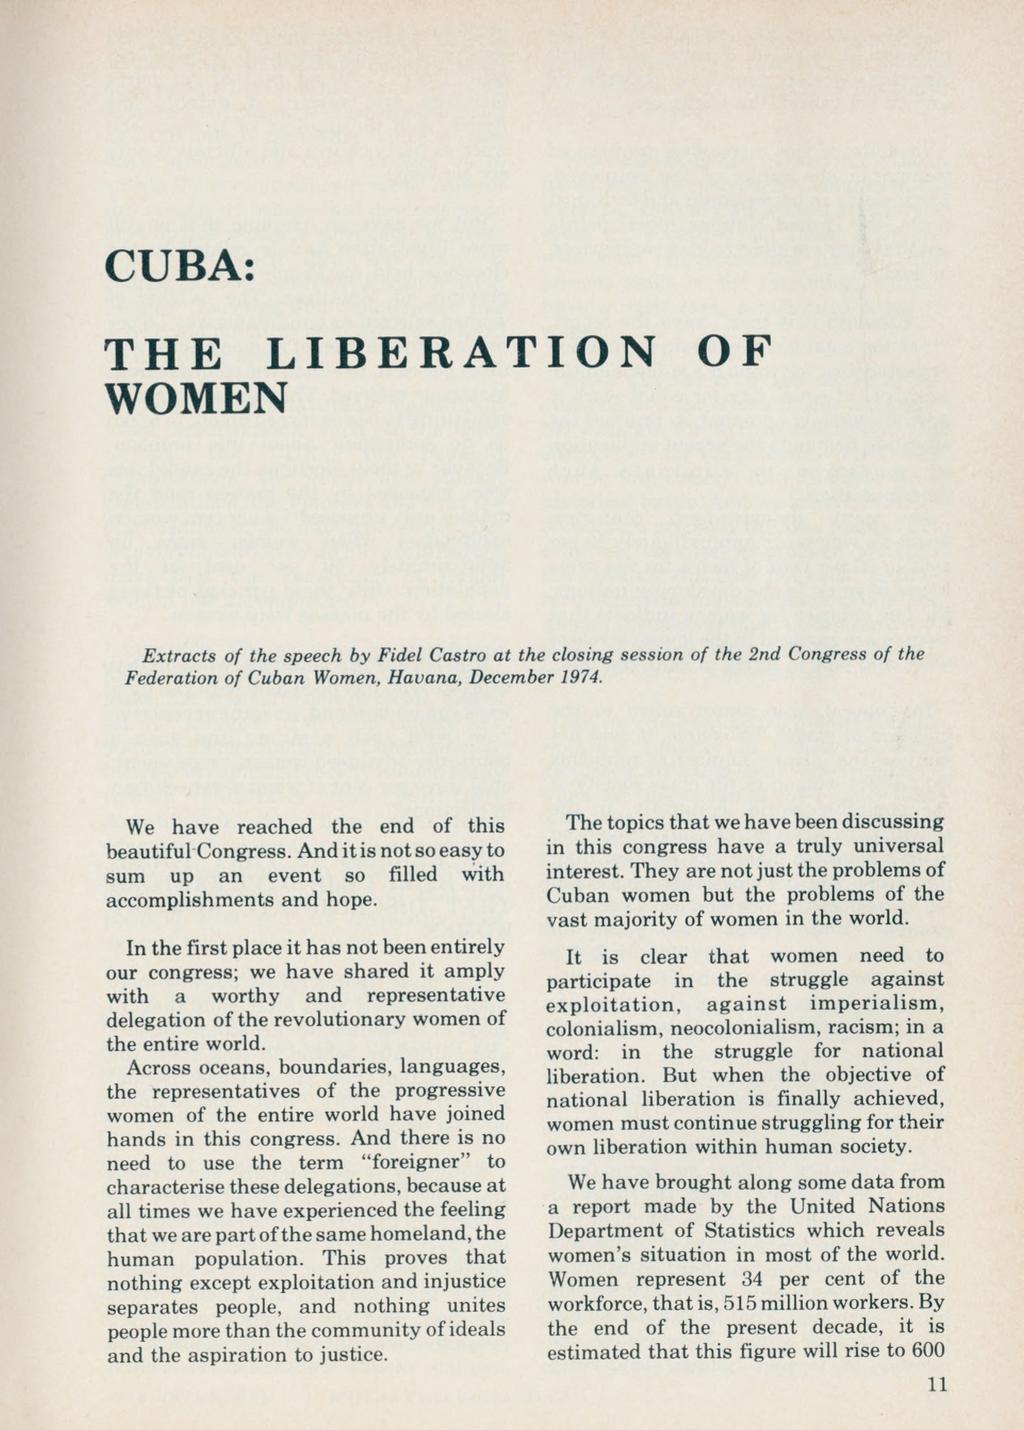 CUBA: TH E LIBERATION OF WOMEN Extracts of the speech by Fidel Castro at the closing session of the 2nd Congress of the Federation of Cuban Women, Havana, December 1974.